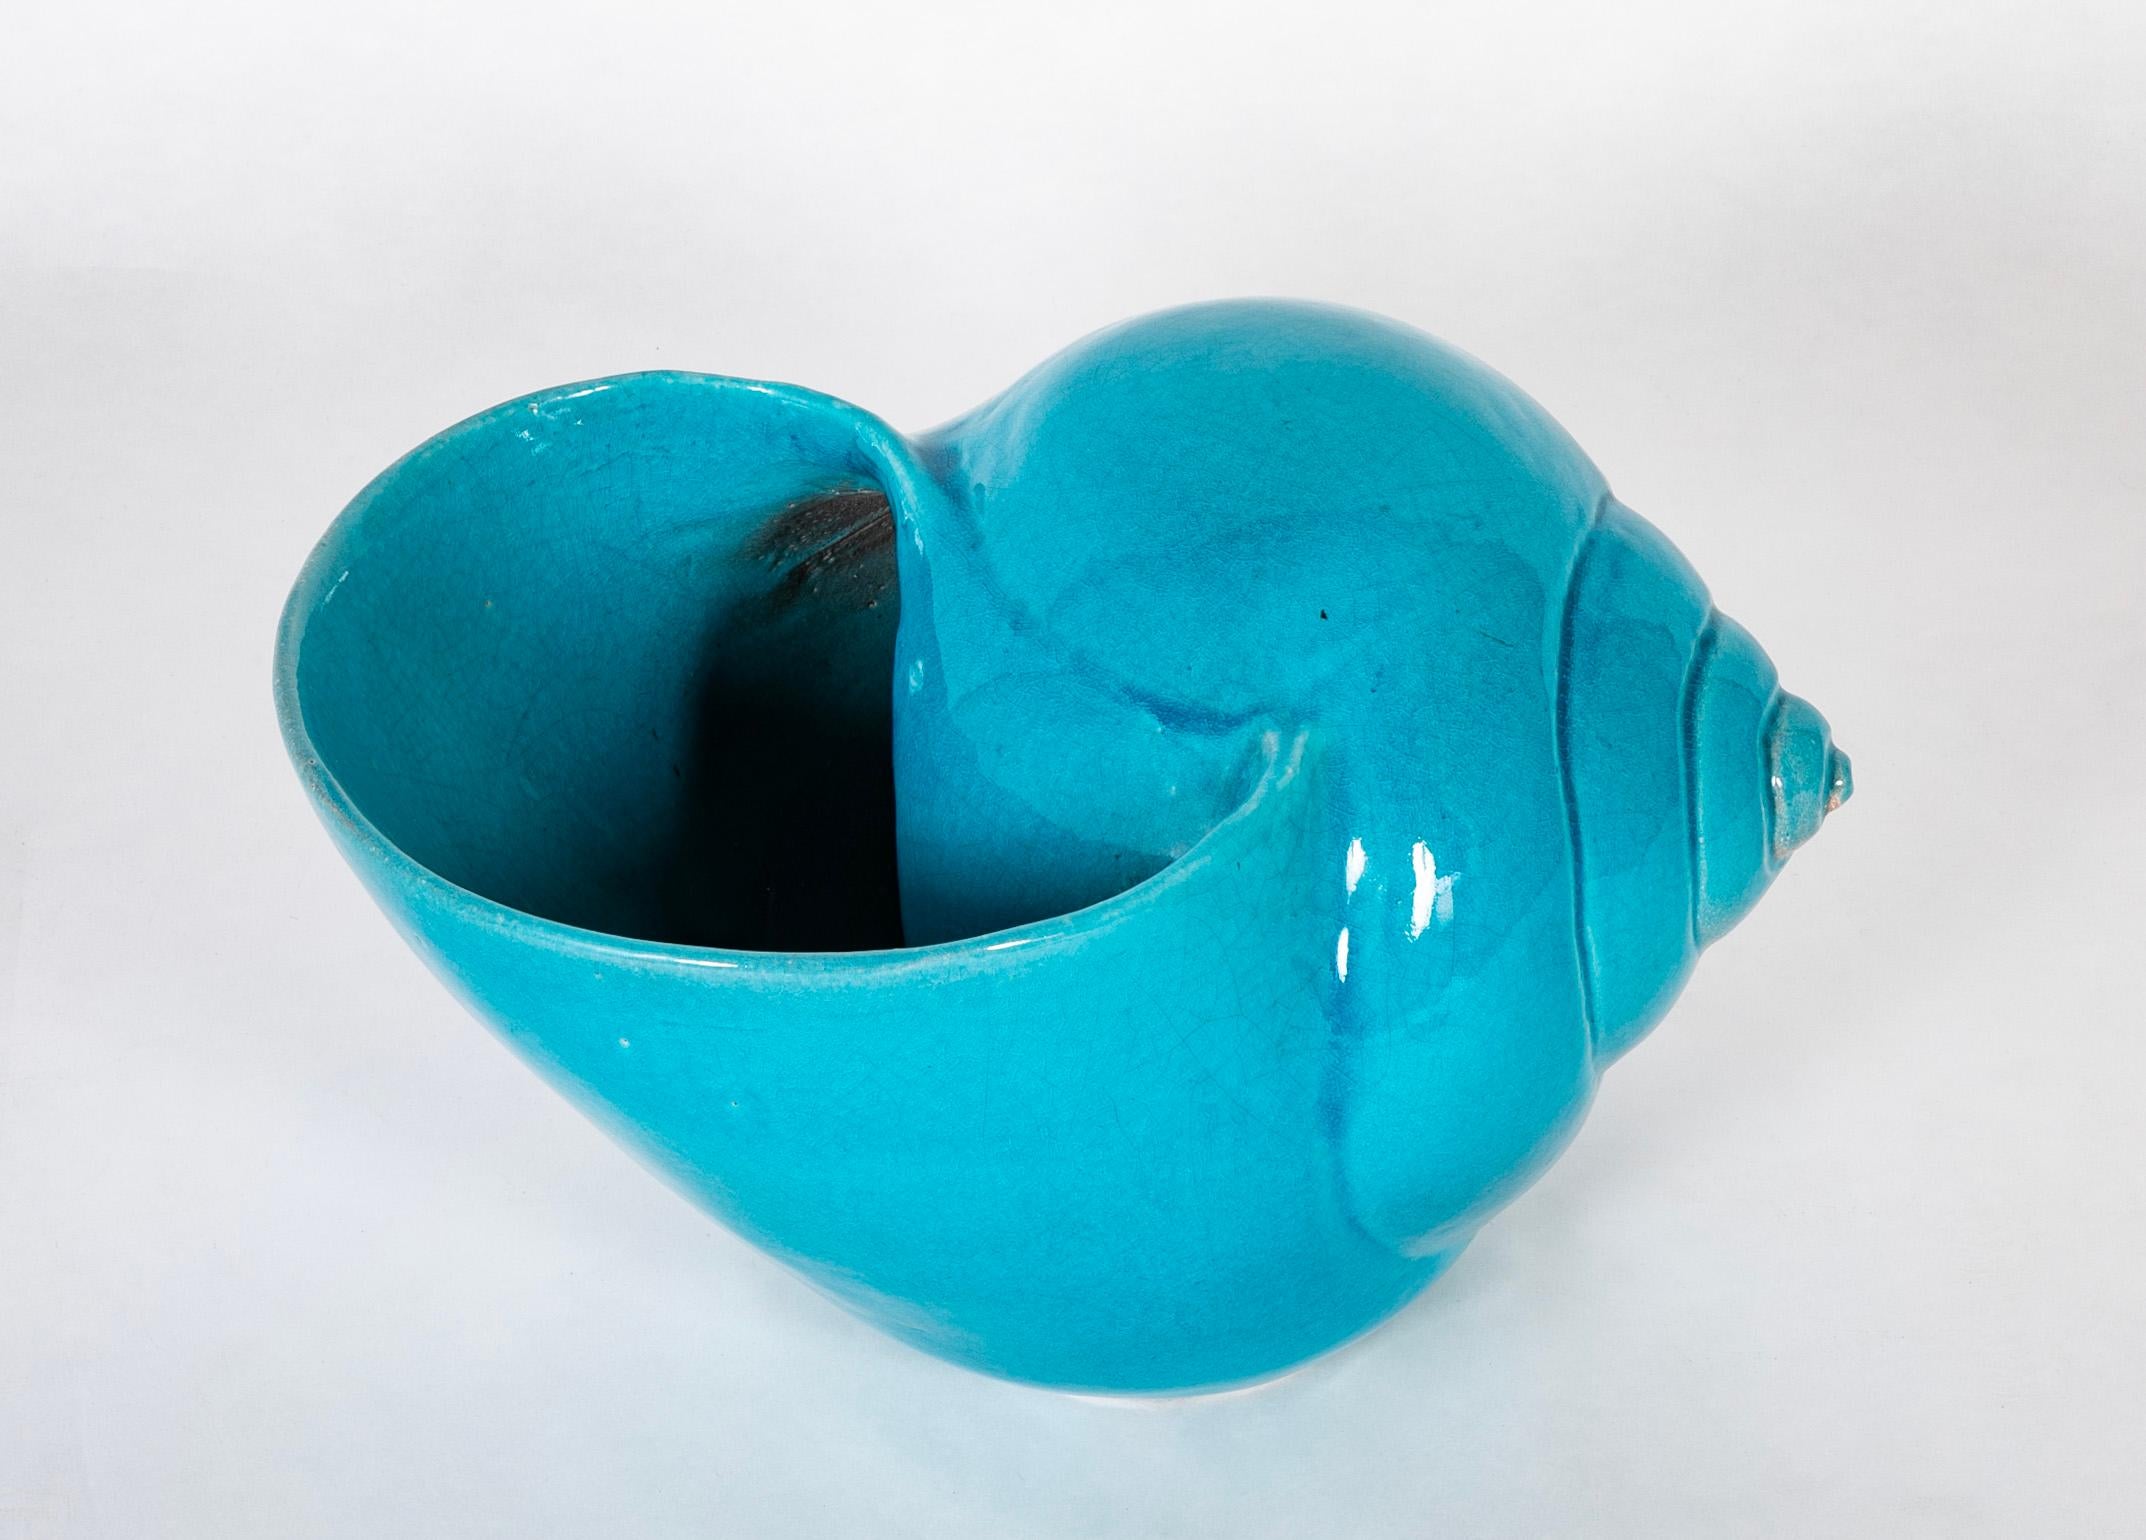 Turquoise Blue Glazed Sea Shell Vase Jardiniere Planter, Large Scale For Sale 2